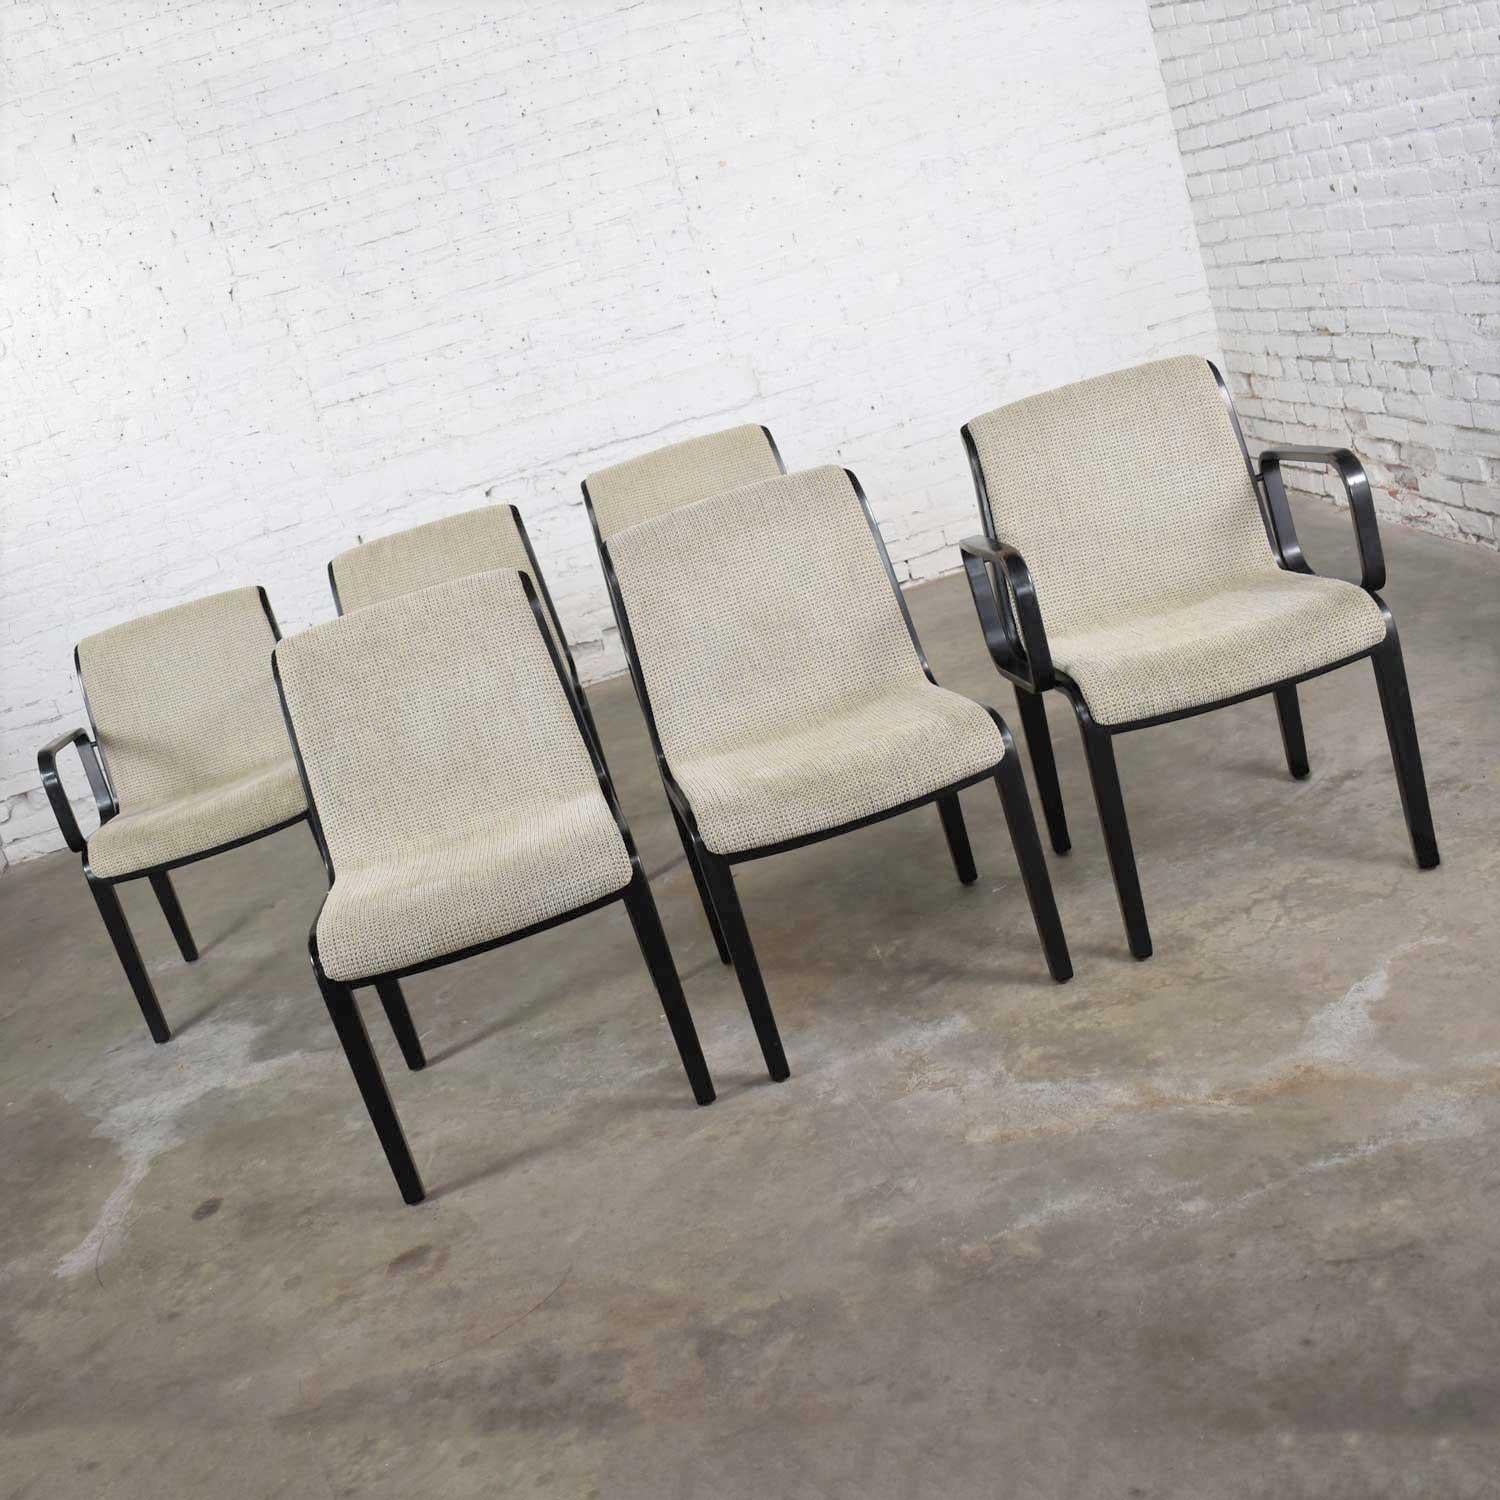 Painted Bill Stephens Knoll 1300 Series Black Dining Chairs Mid-Century Modern Set of 6